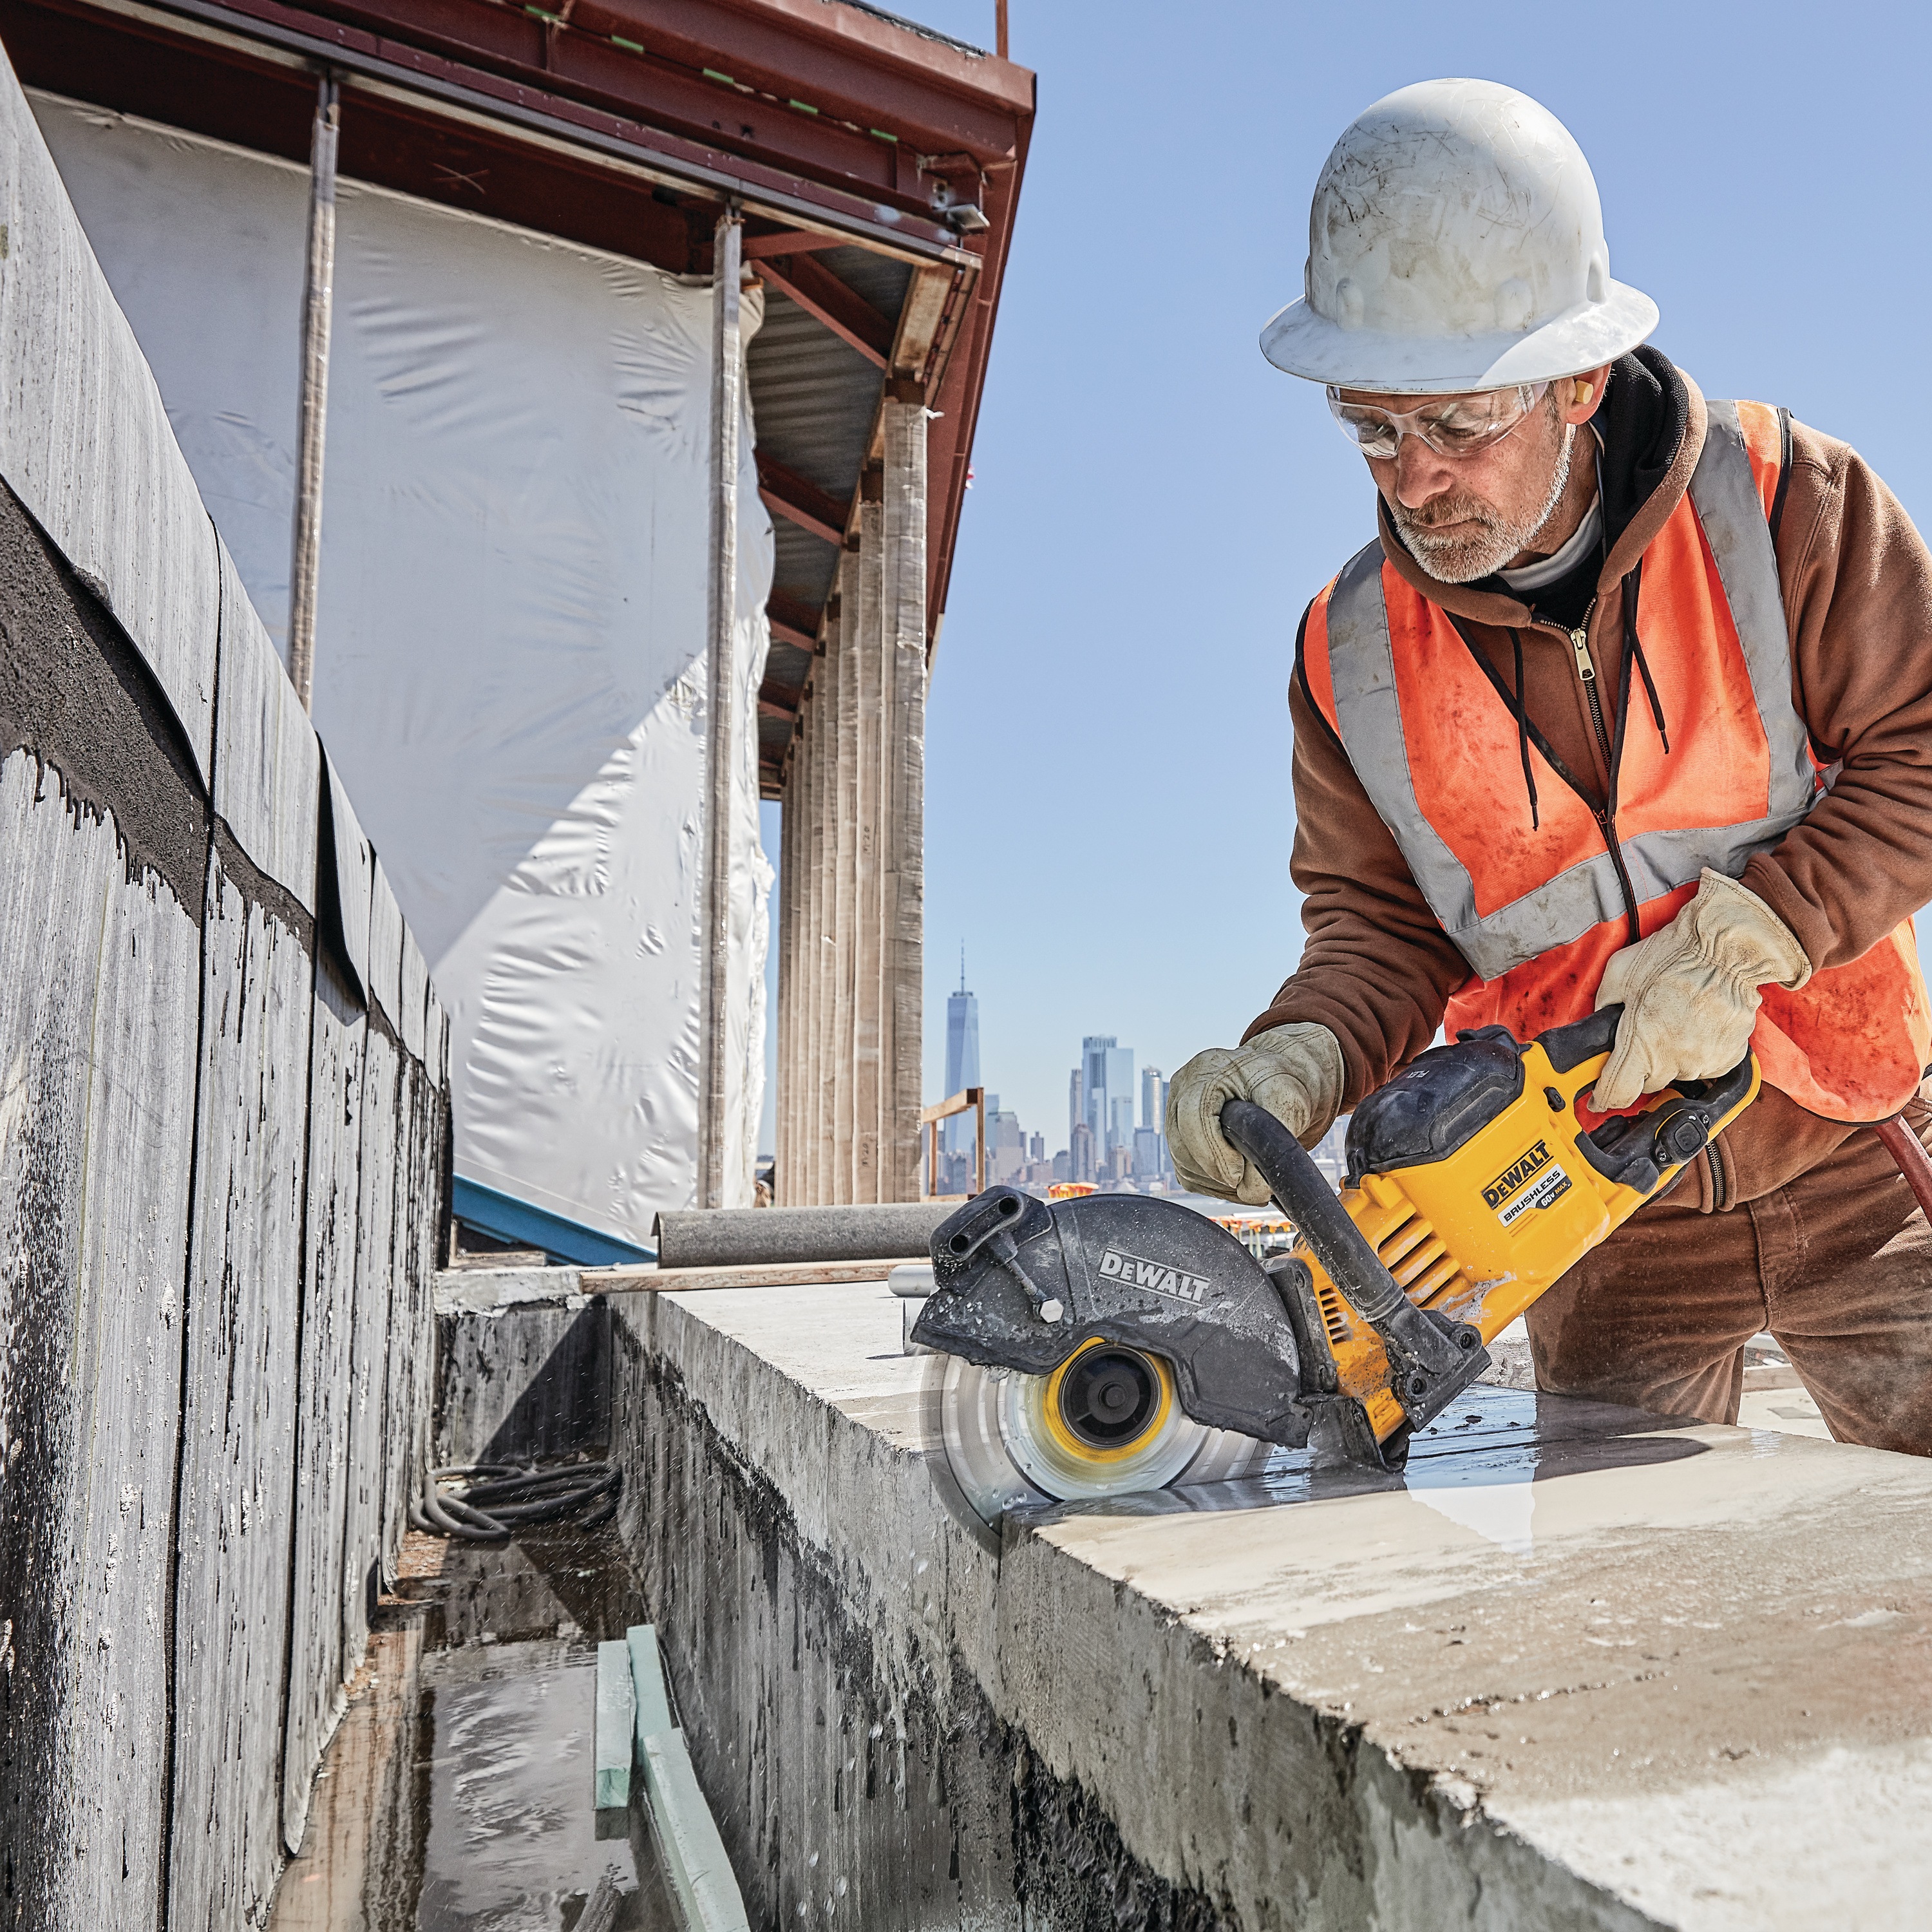 20 Volt to 60 Volt 12 AMP hours Lithium Ion Battery powered Circular Saw being used by a construction worker to cut concrete at a construction site